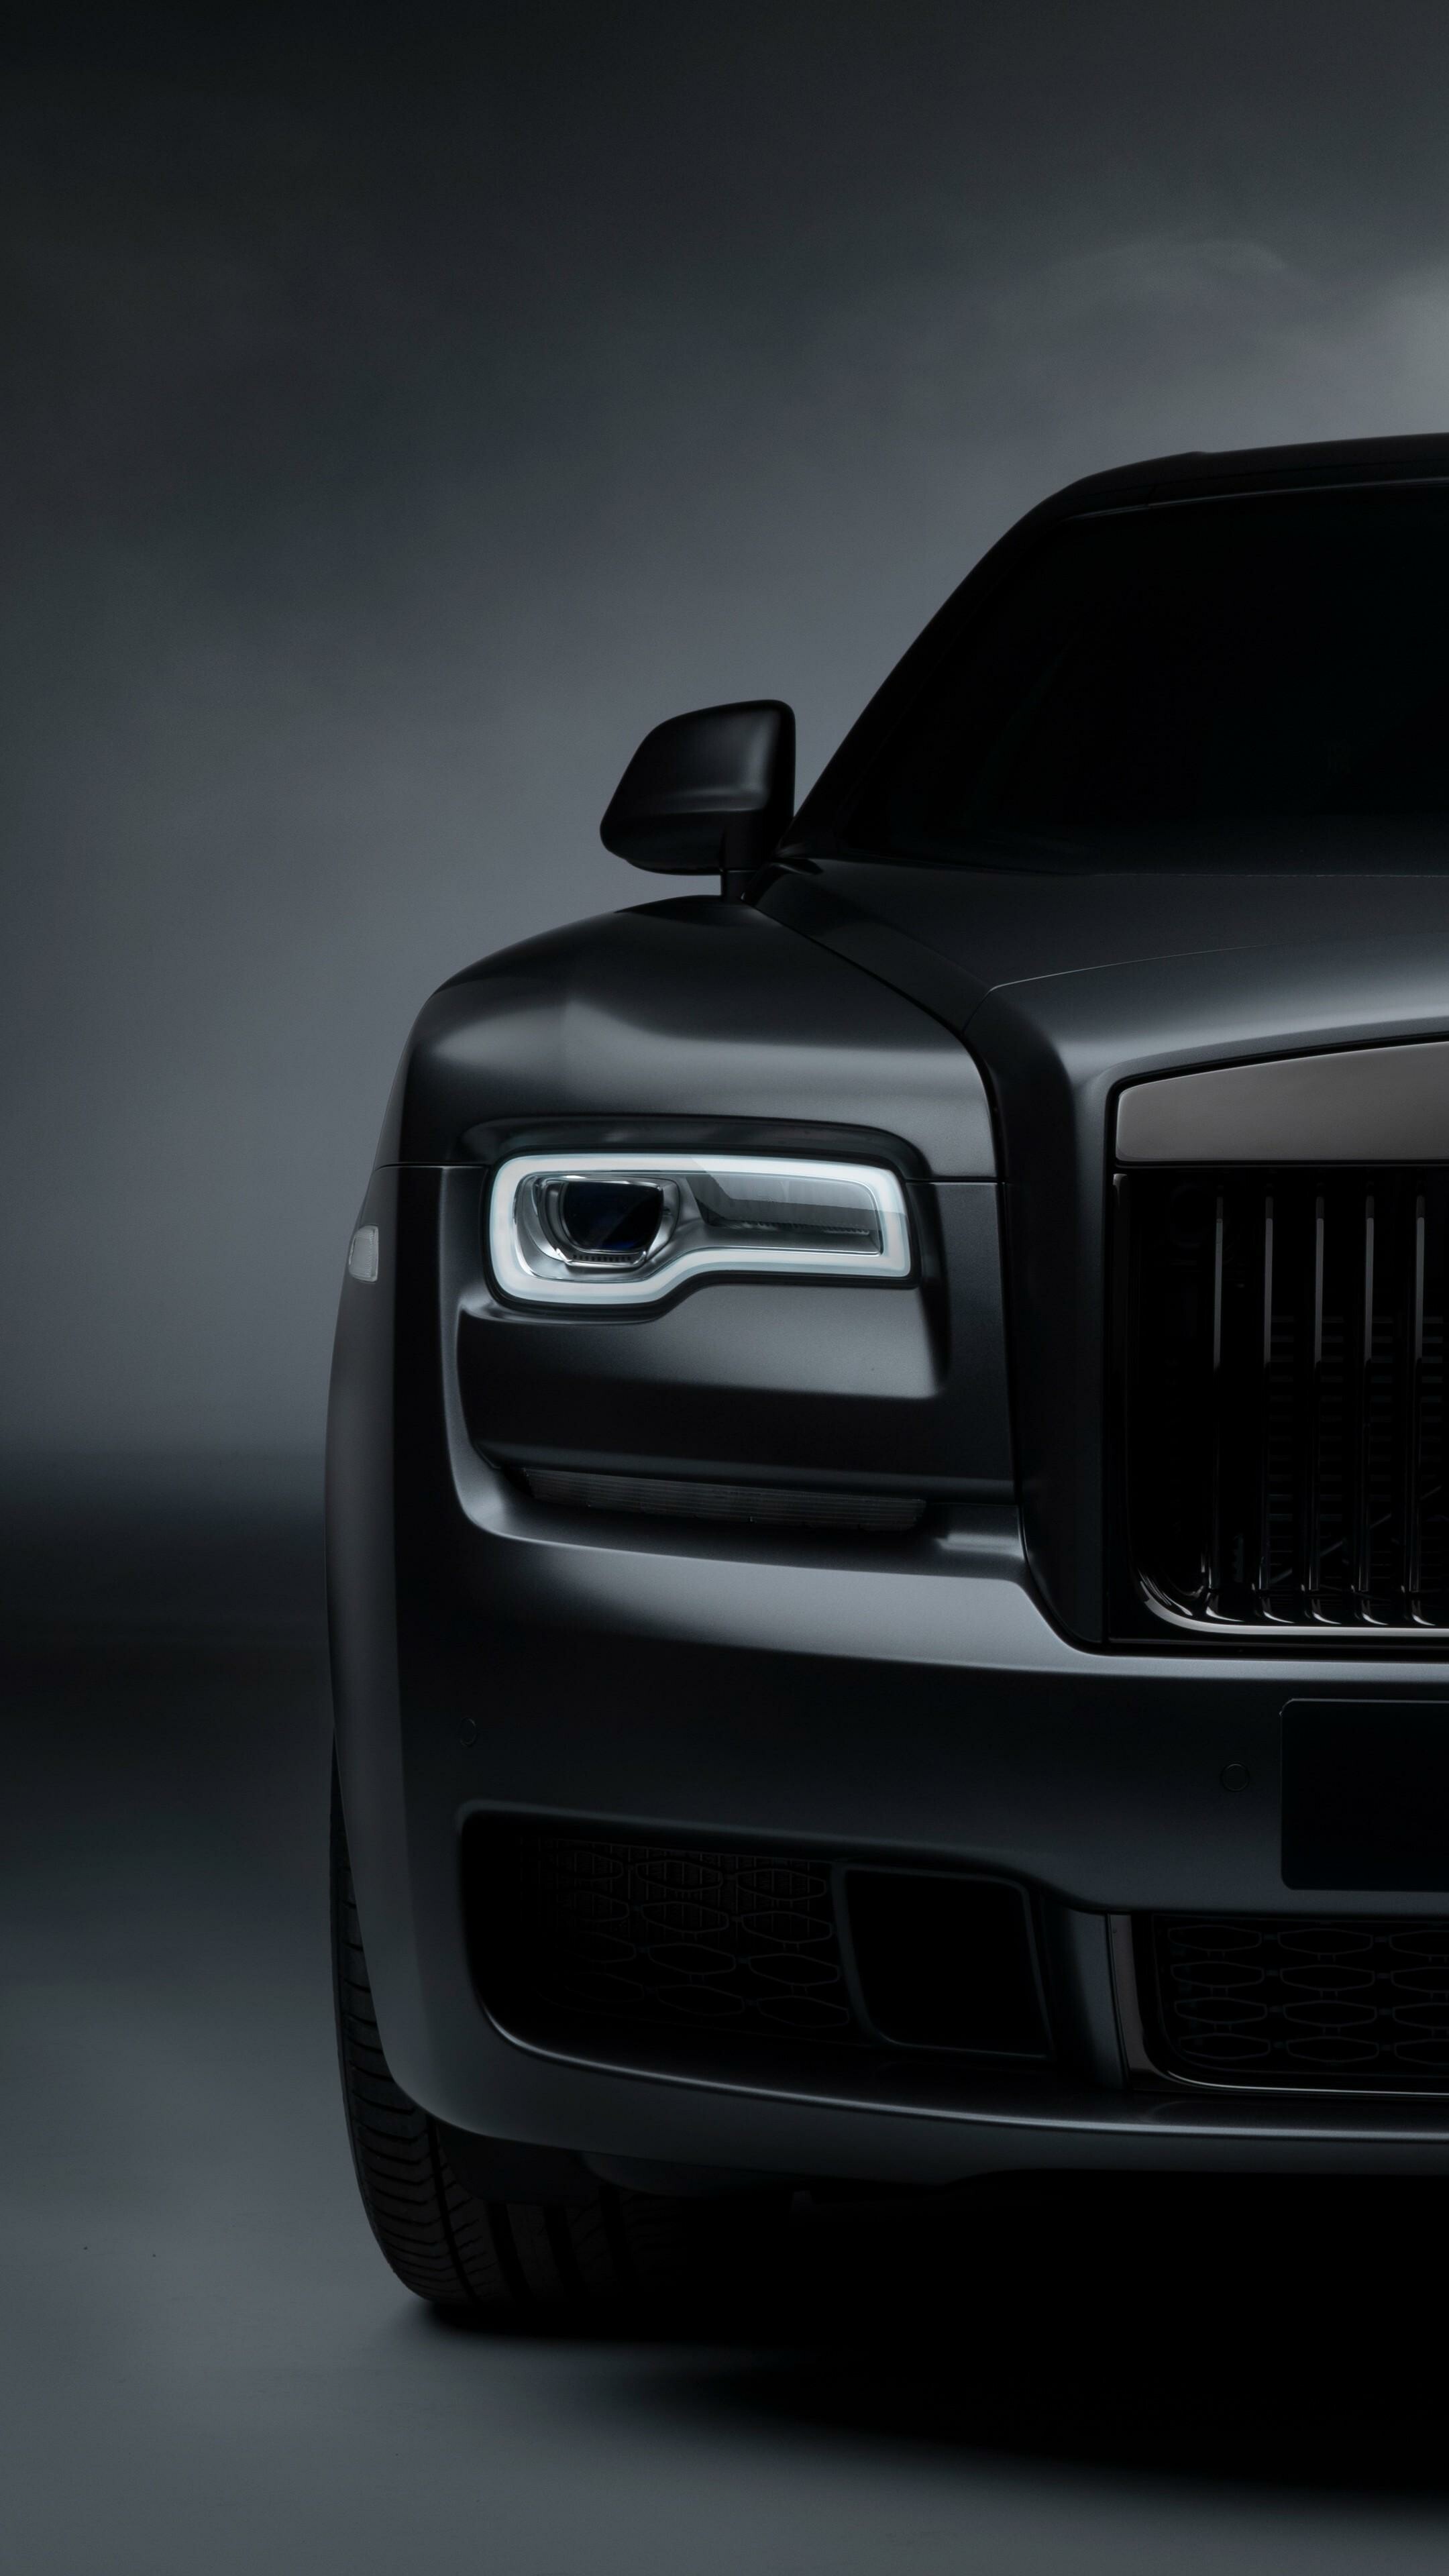 Rolls-Royce: The company was formed on 15 March 1906, Ghost Black Badge. 2160x3840 4K Wallpaper.